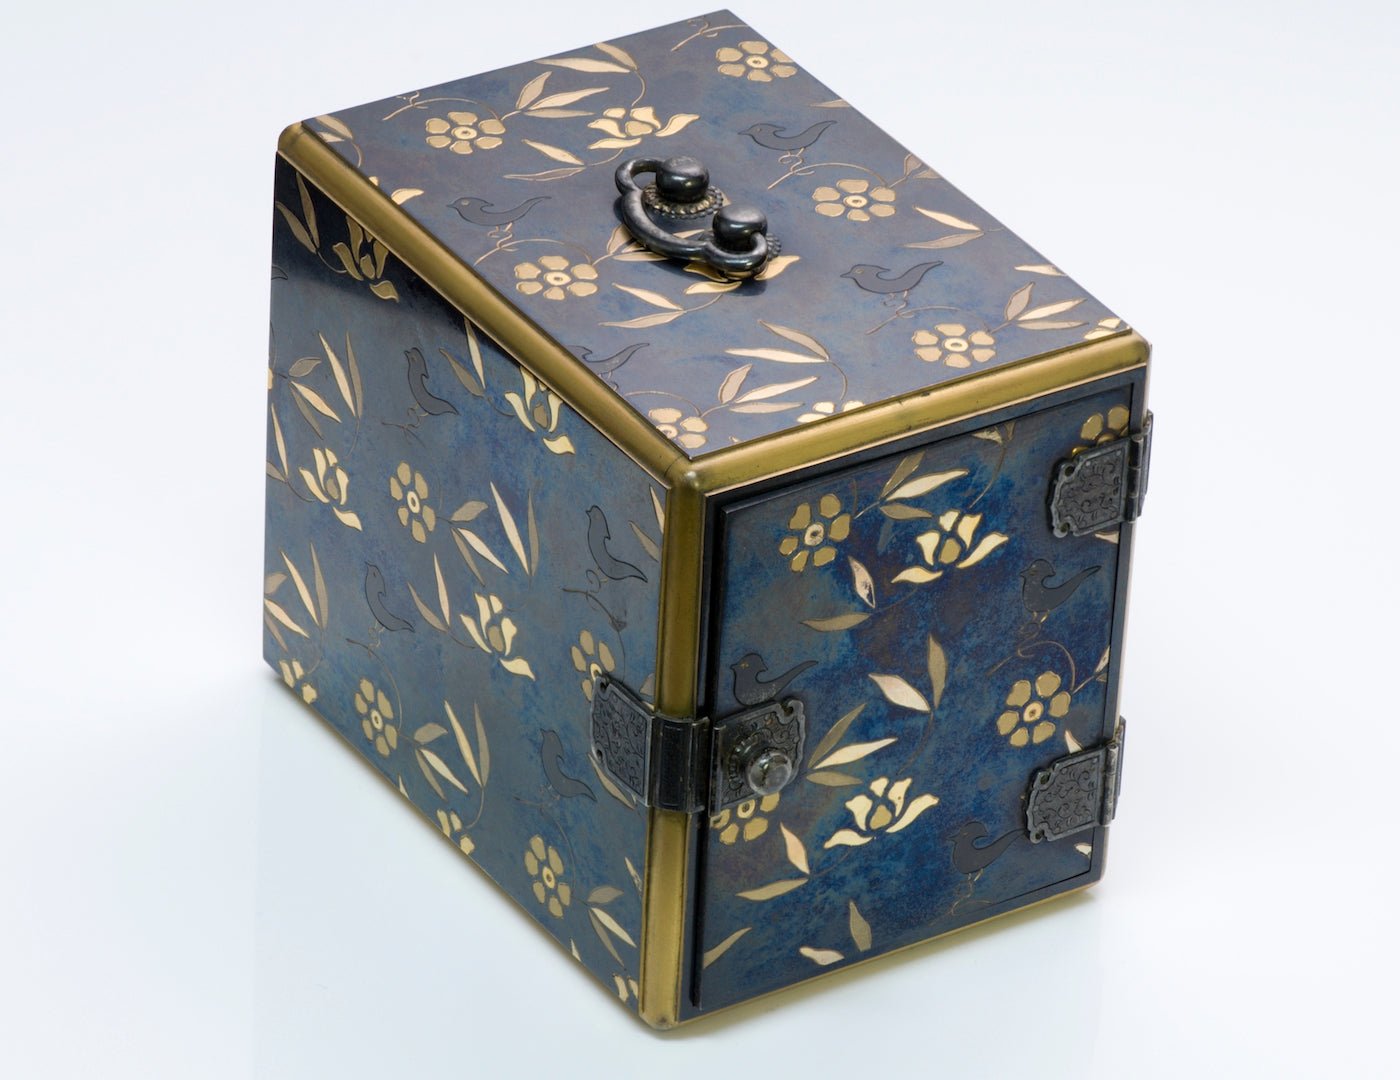 Antique Japanese Jewelry Box - DSF Antique Jewelry